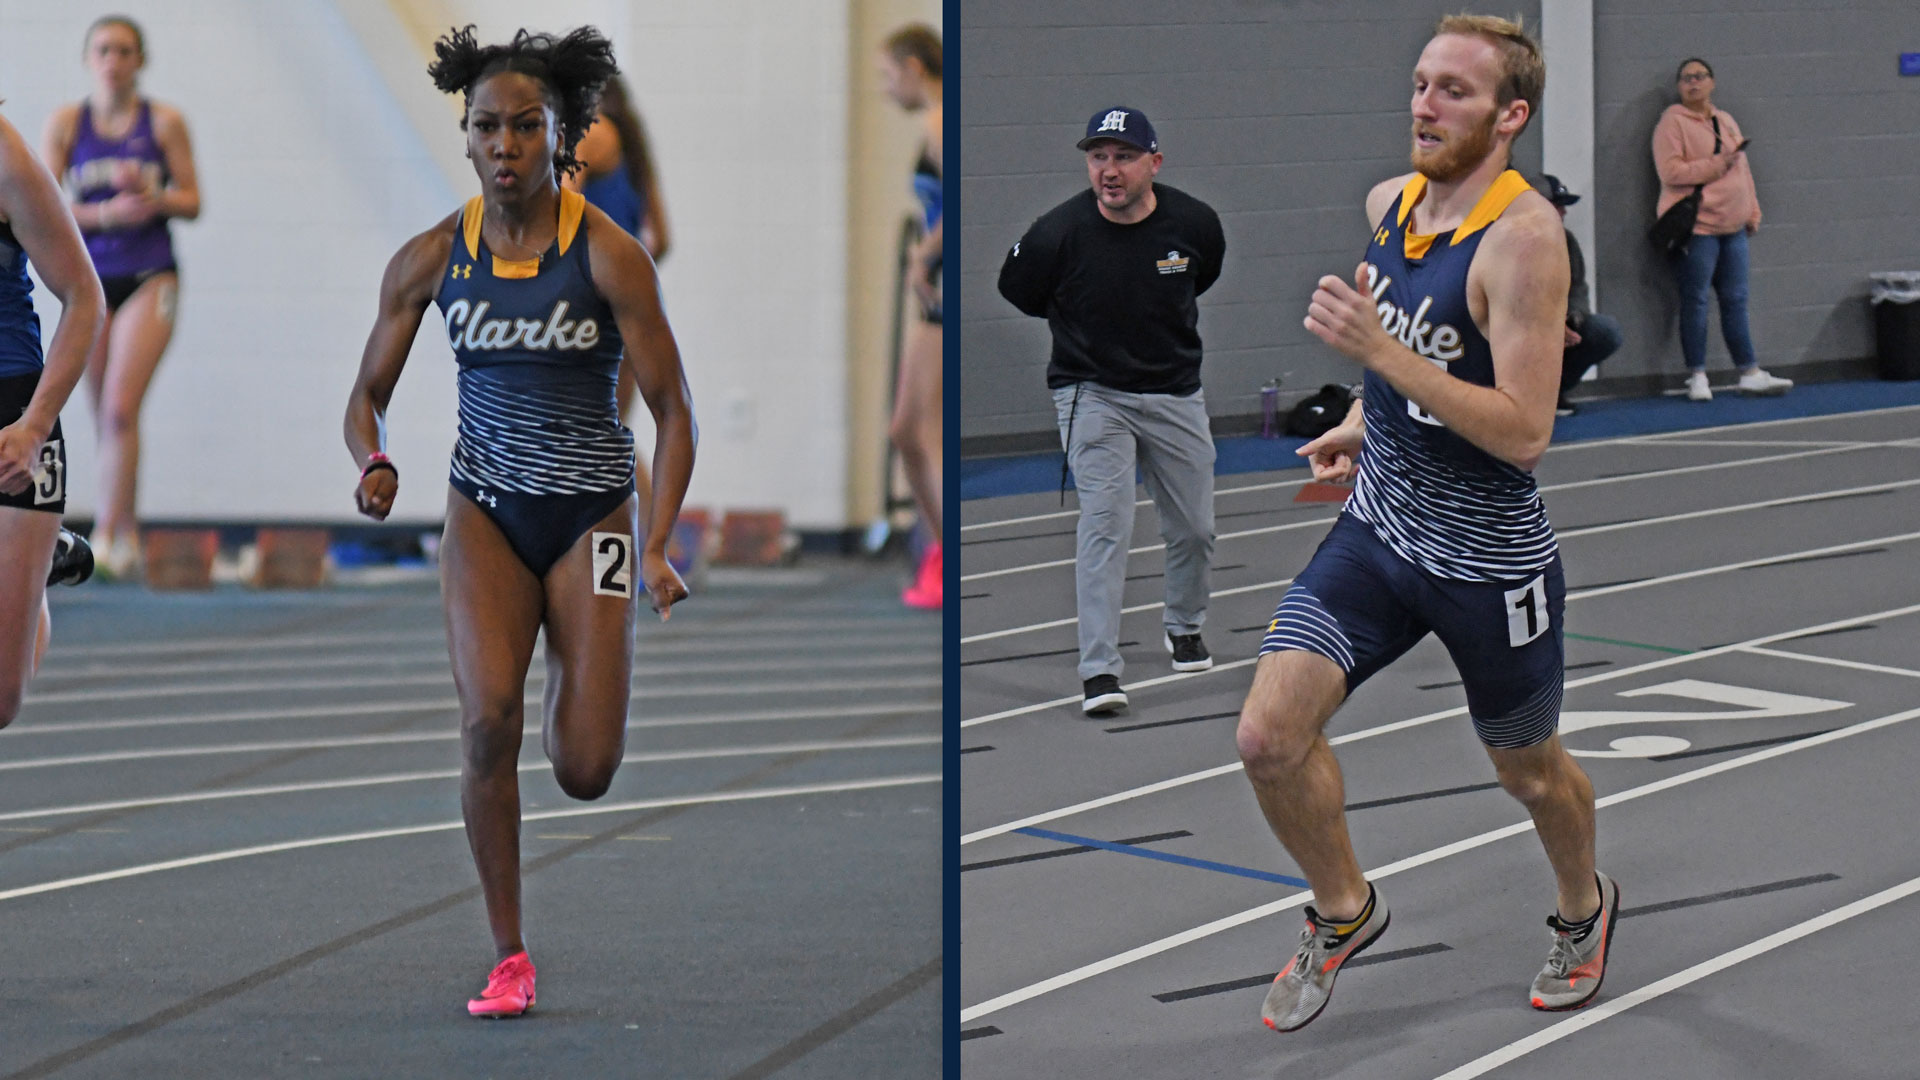 Pride track and field finish extended weekend with new records and a national qualifier